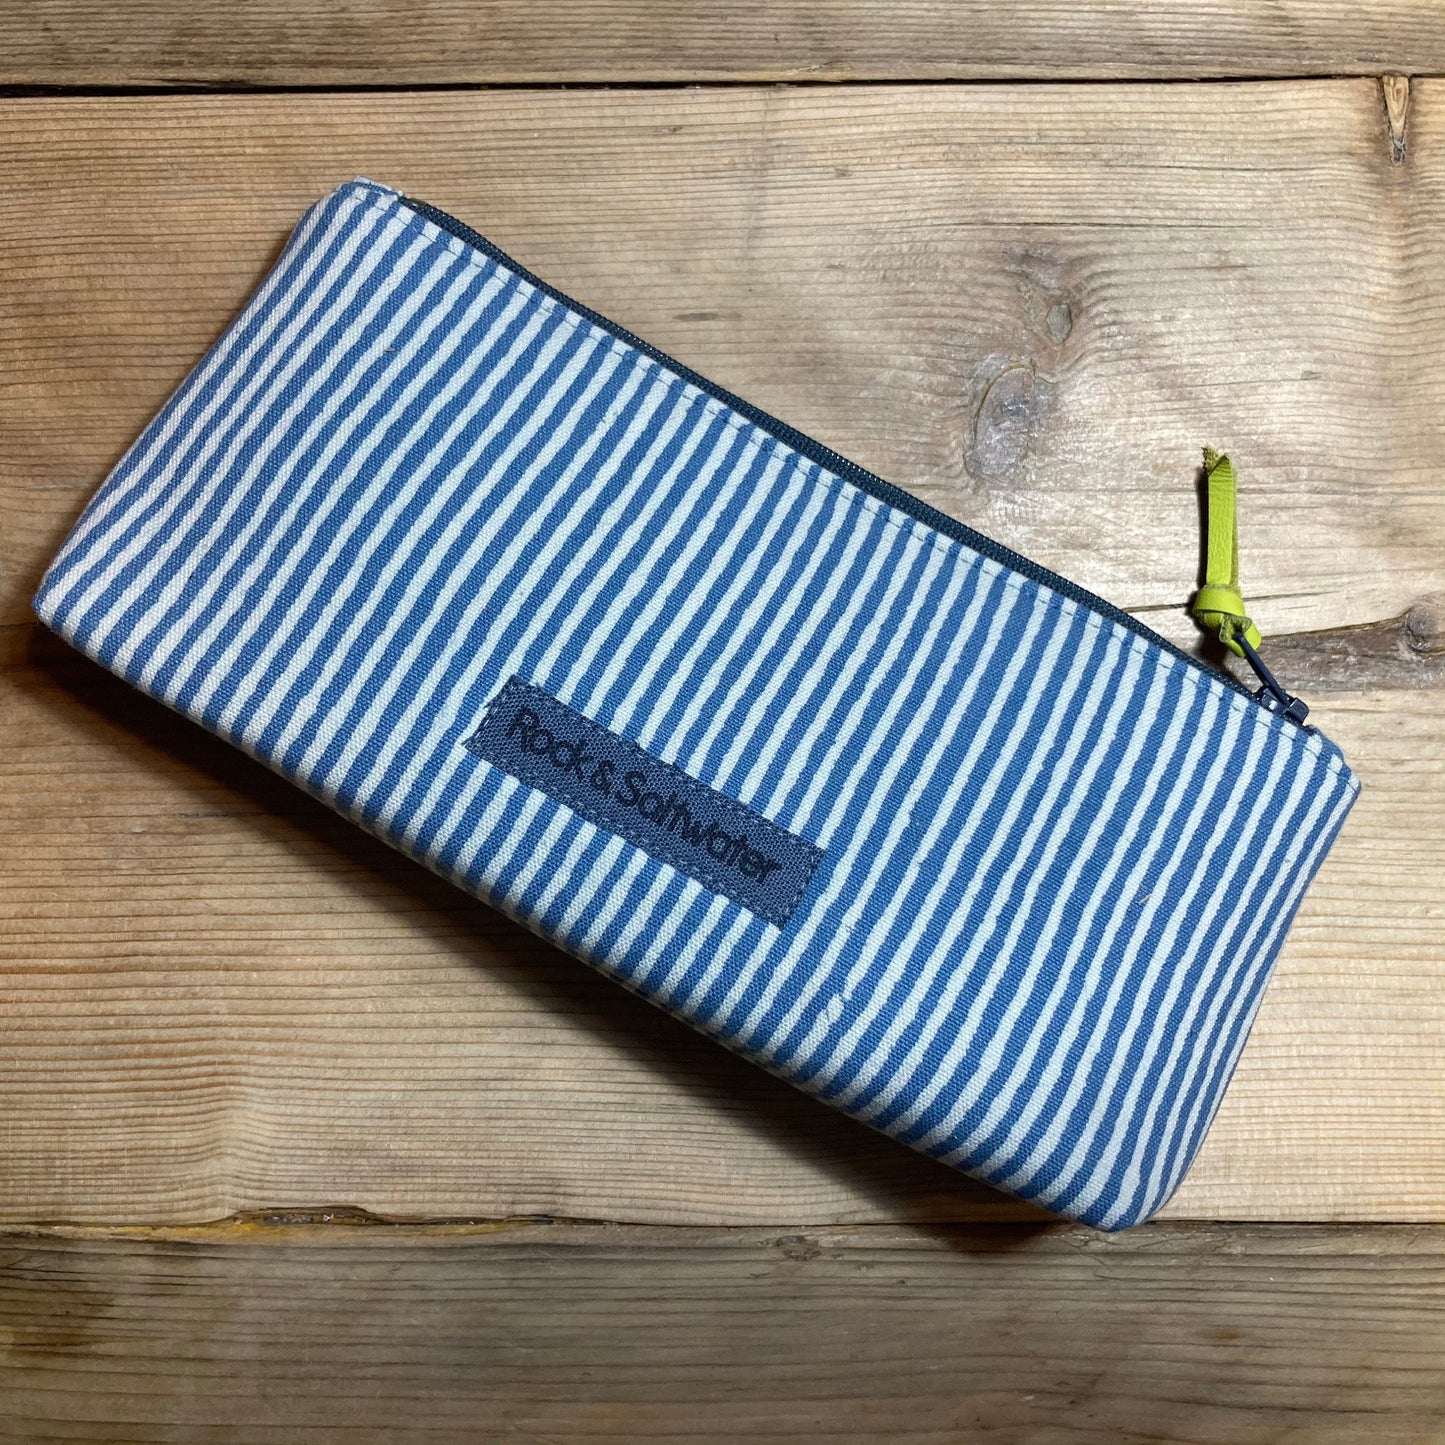 Blue stripe boxed zipped pouch with leather zip pull